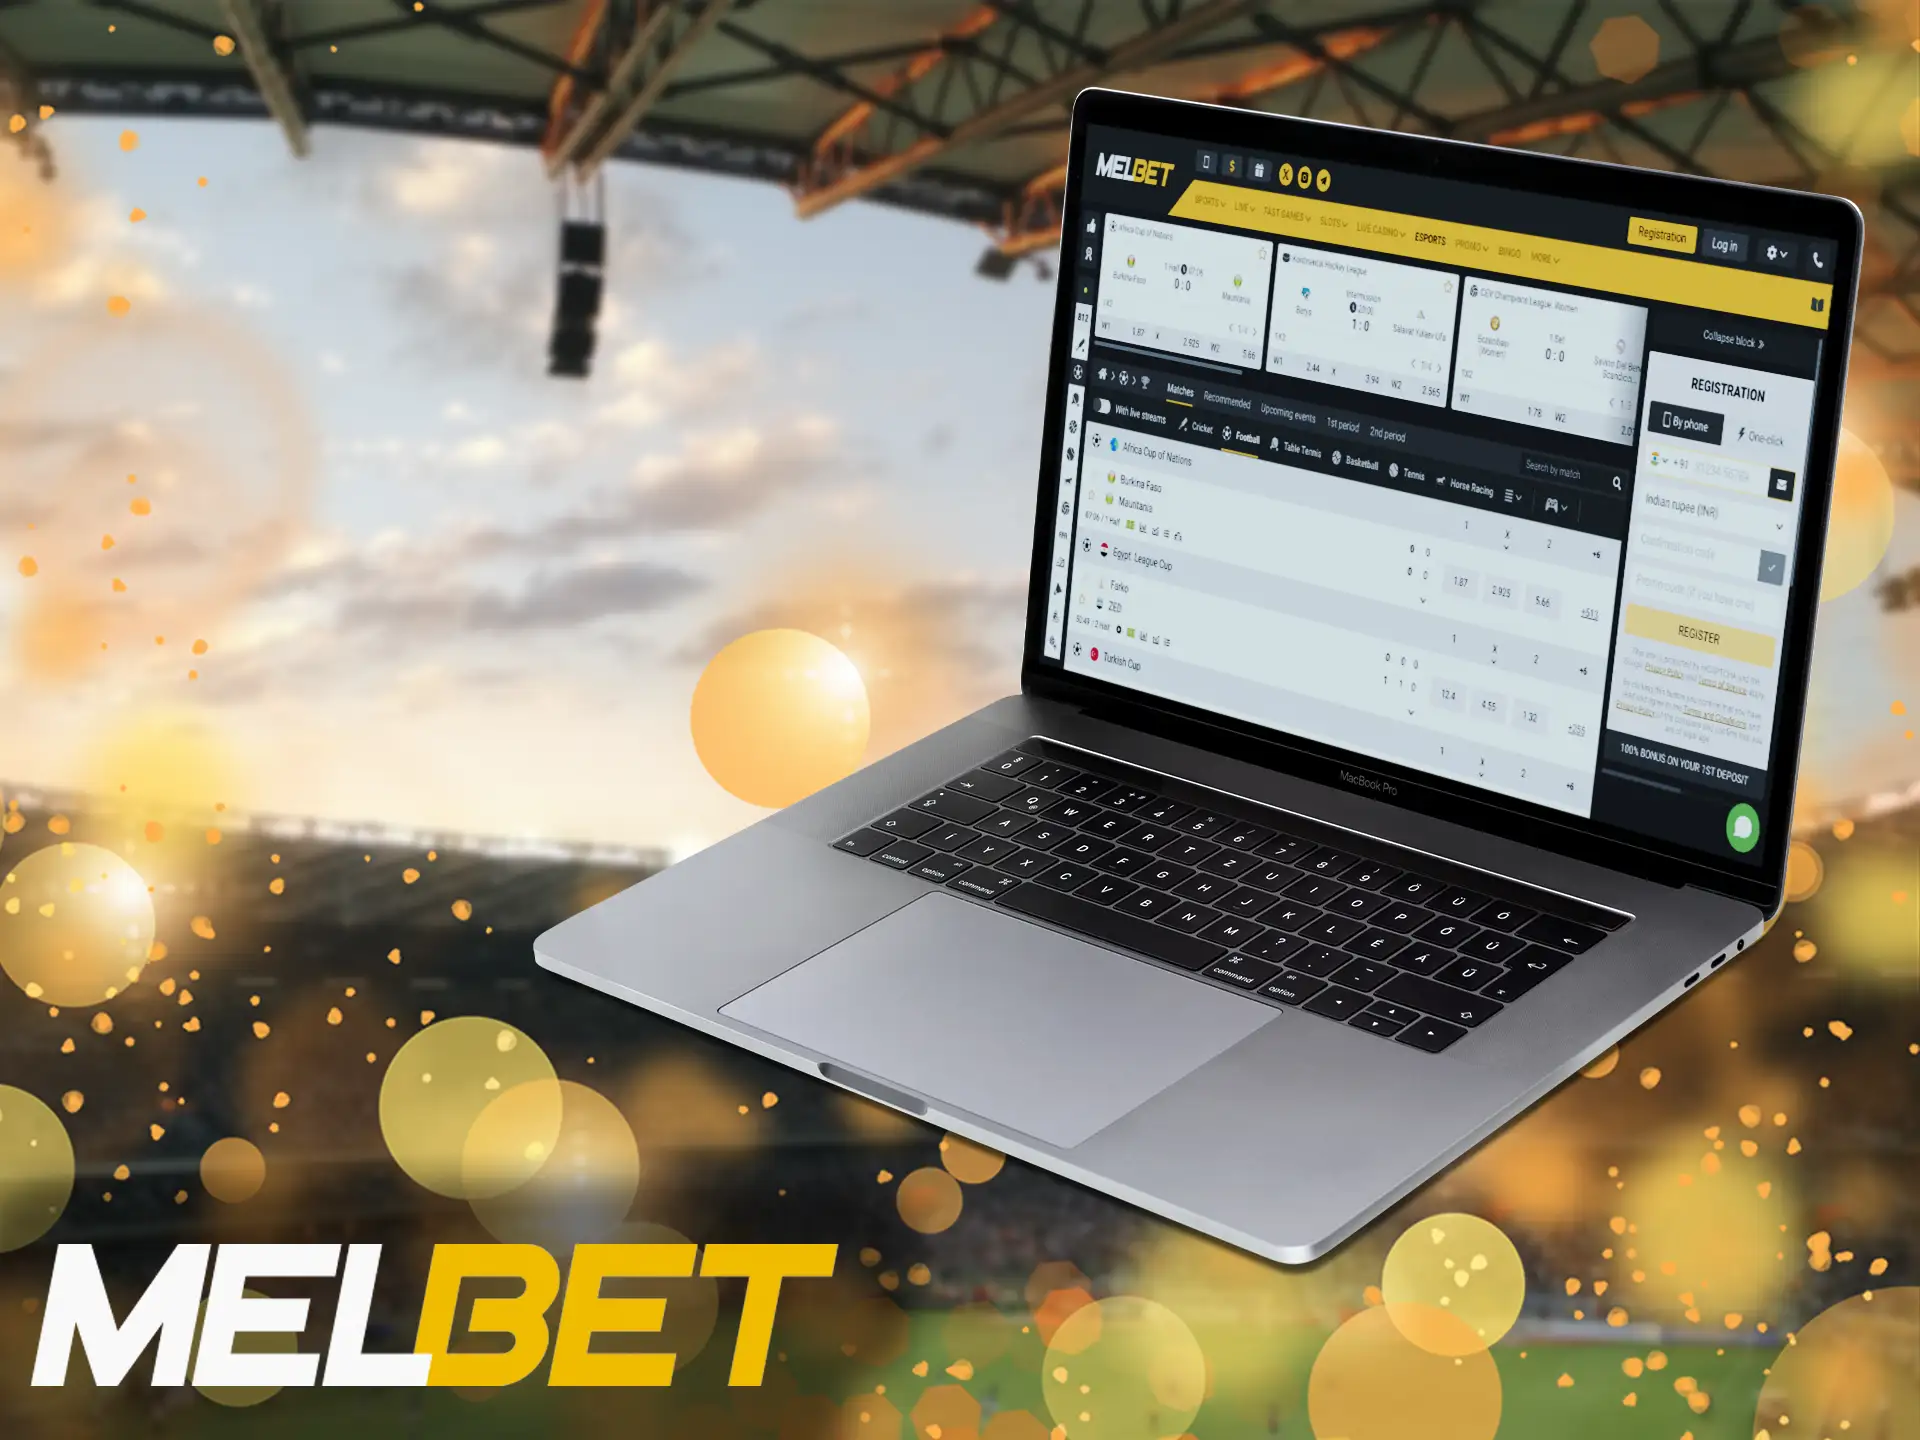 The support team at football betting sites answers customer questions 24/7, real-time betting is available, and data security is guaranteed.